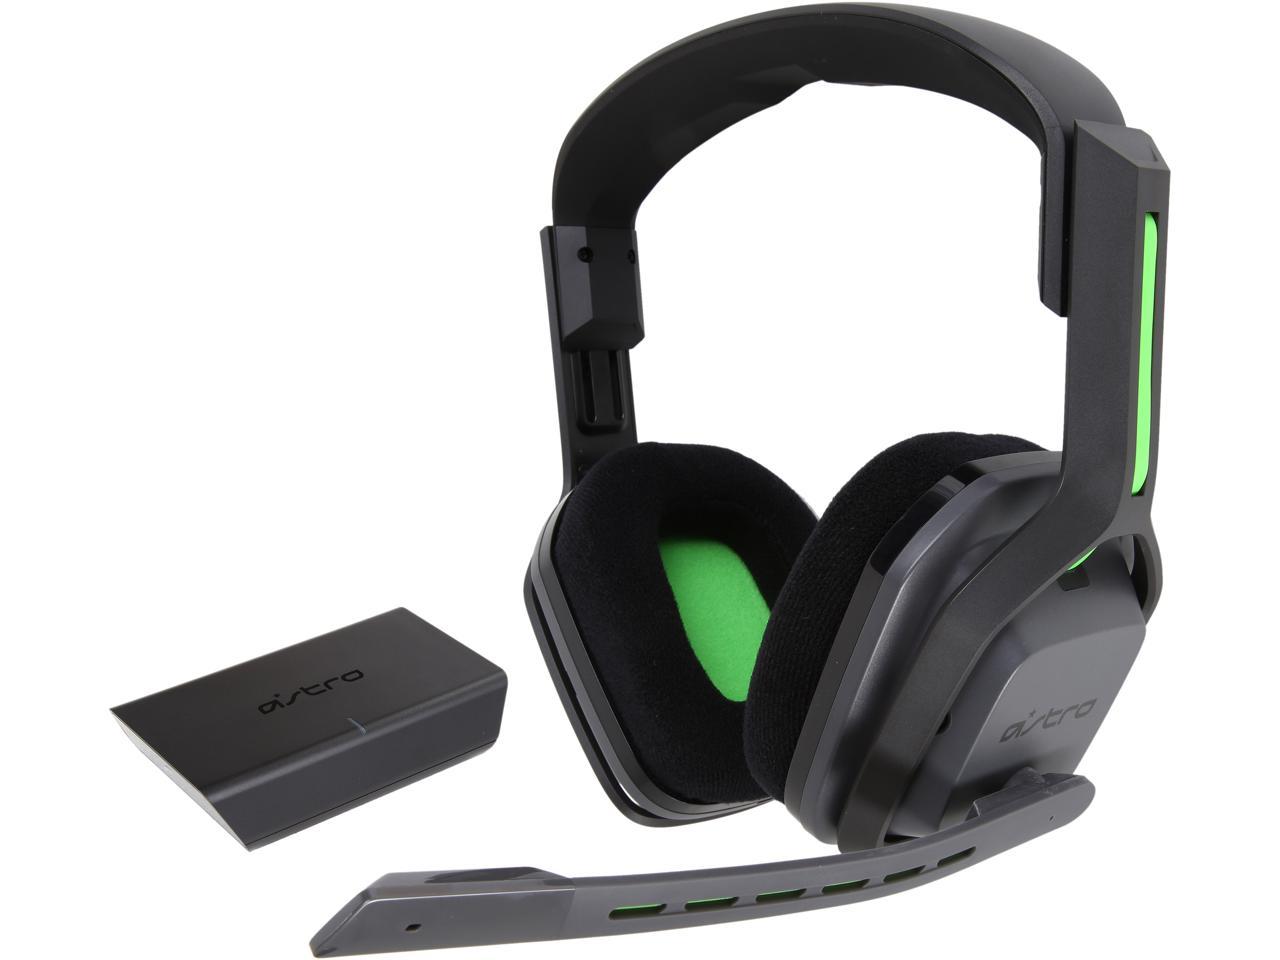 wireless headset for xbox one s